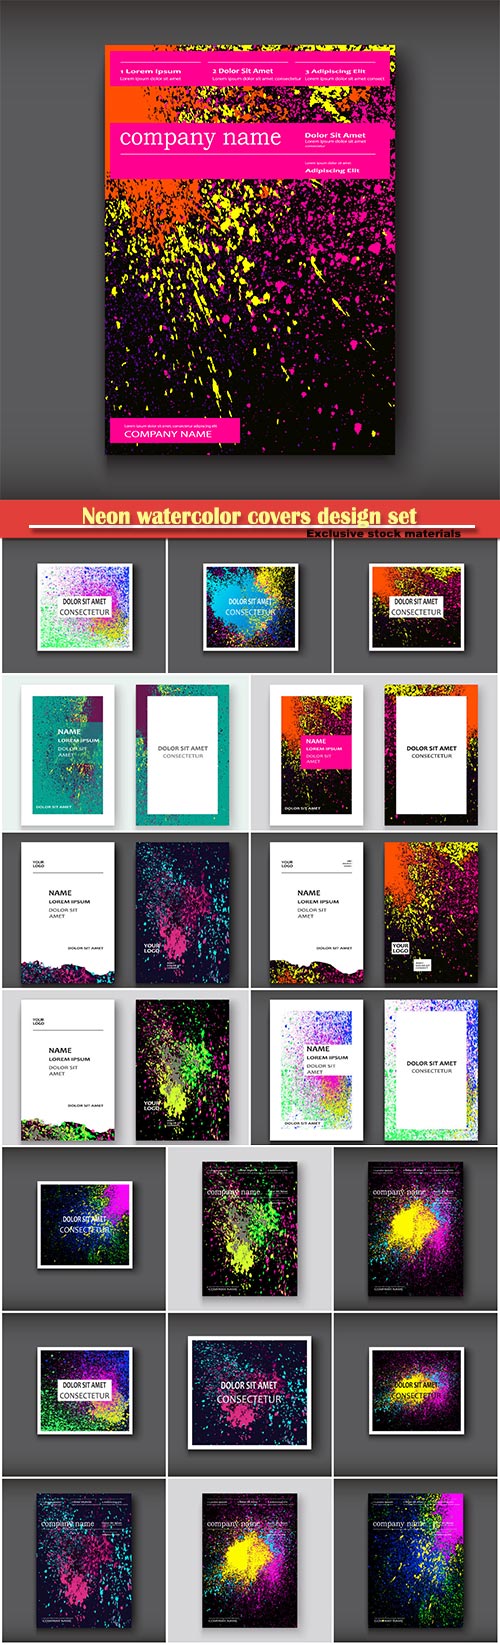 Neon watercolor covers design set, flyer, business card